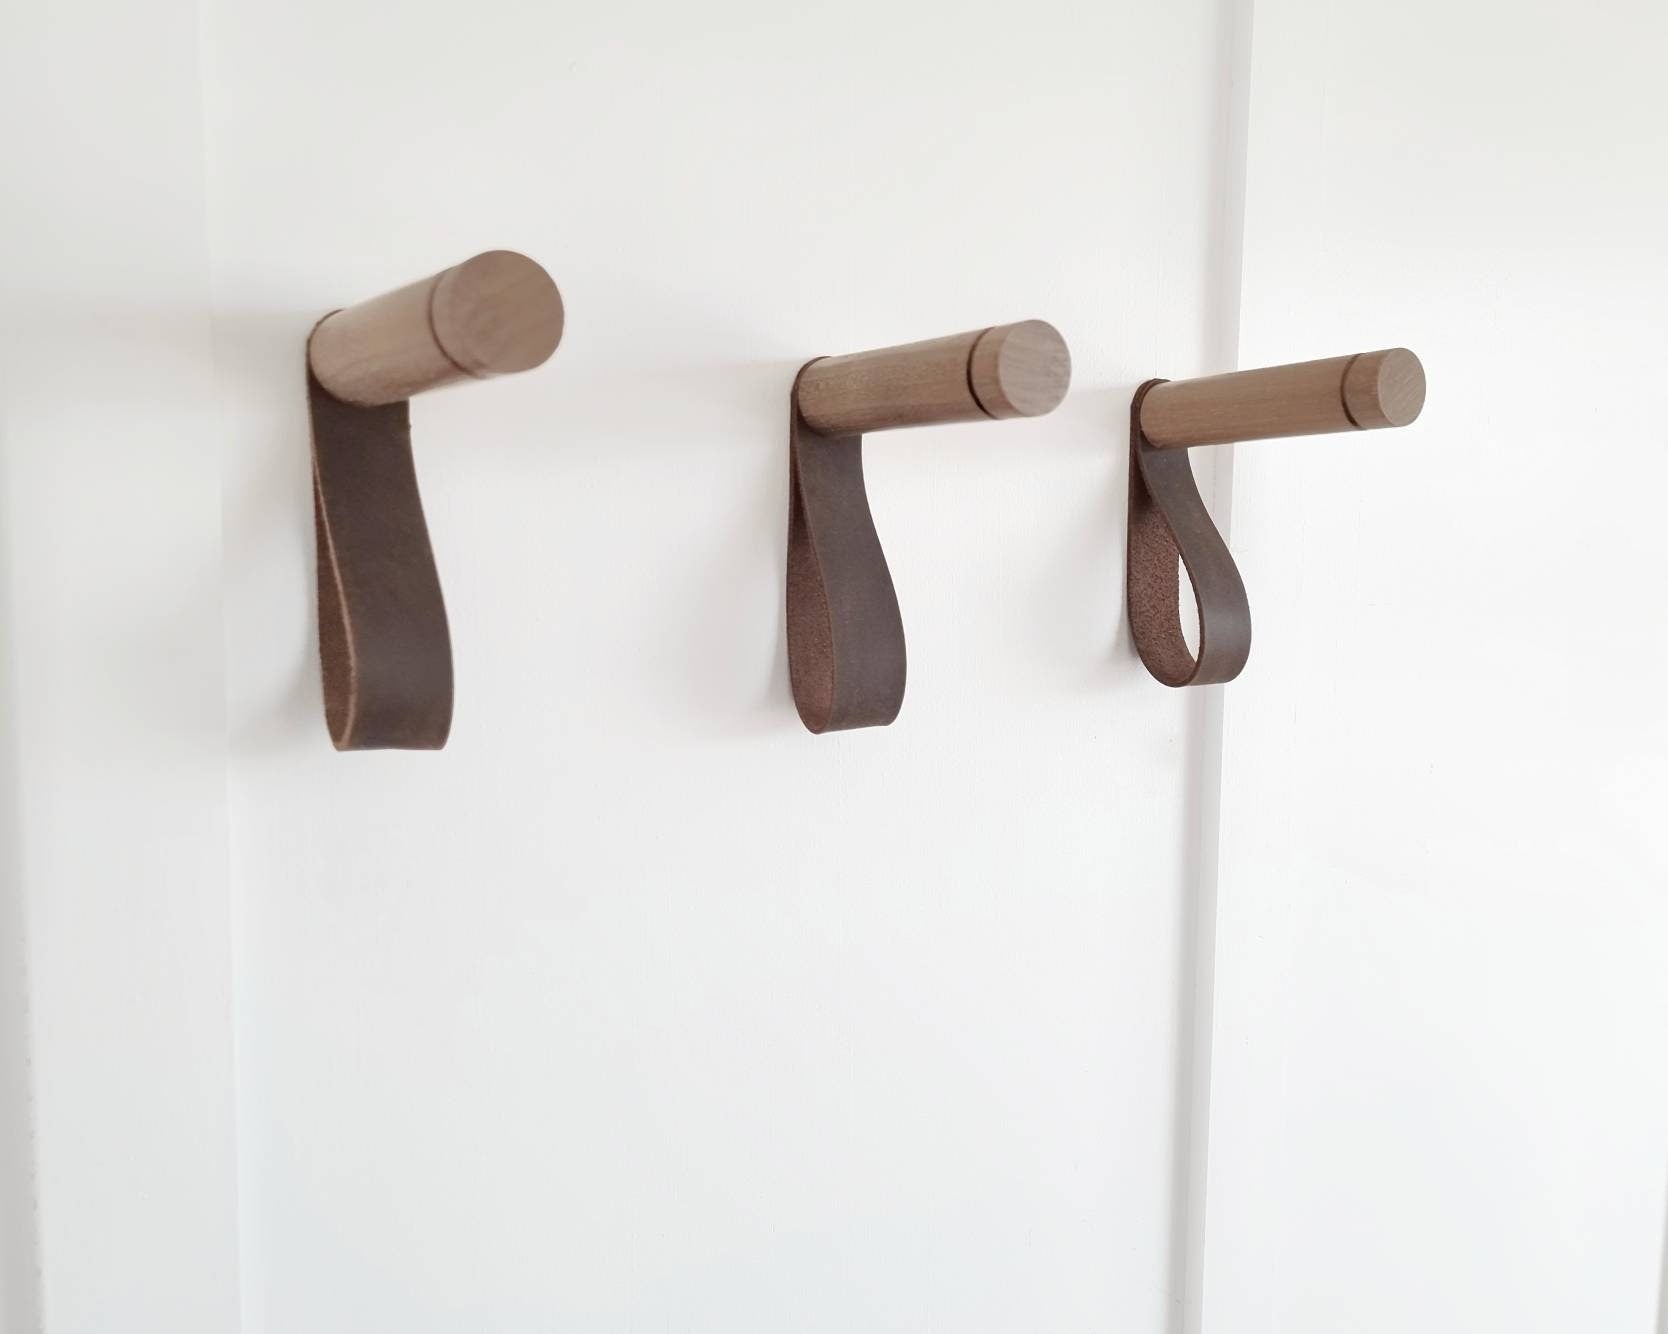 Walnut and Leather Wall Hook / Coat Hook / Clothes Hanger